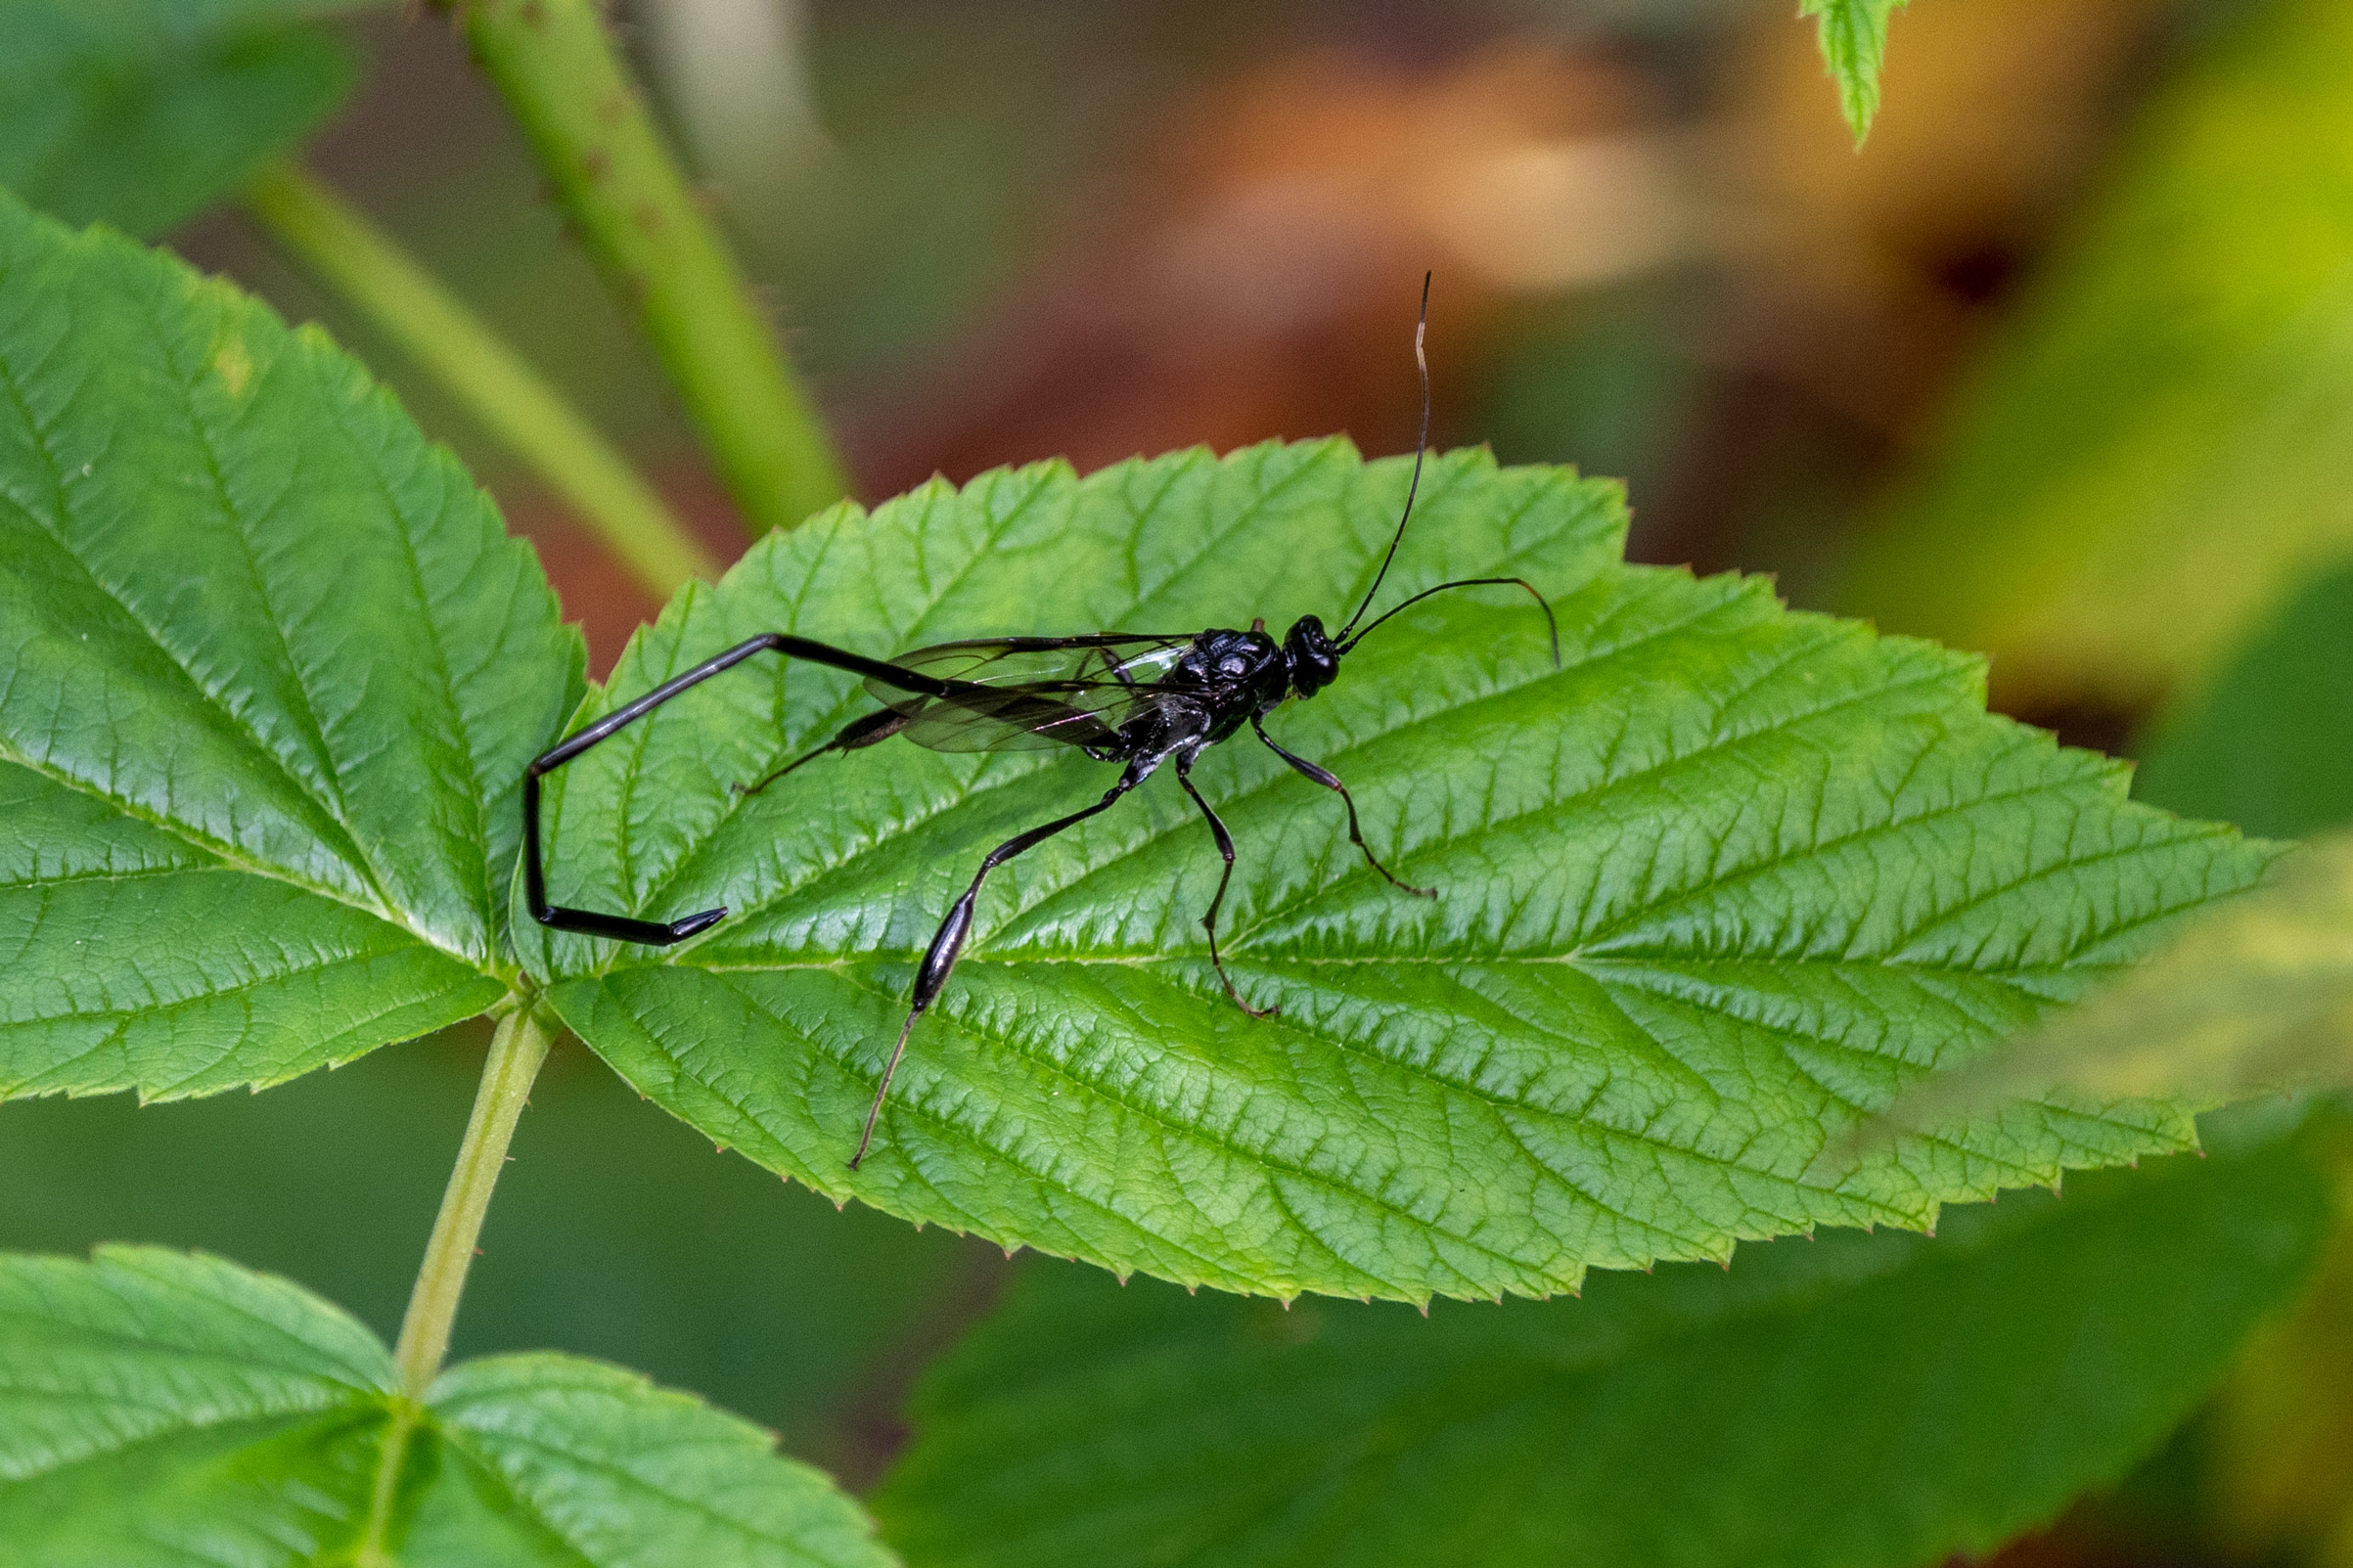 Long black winged insect standing on a green leaf